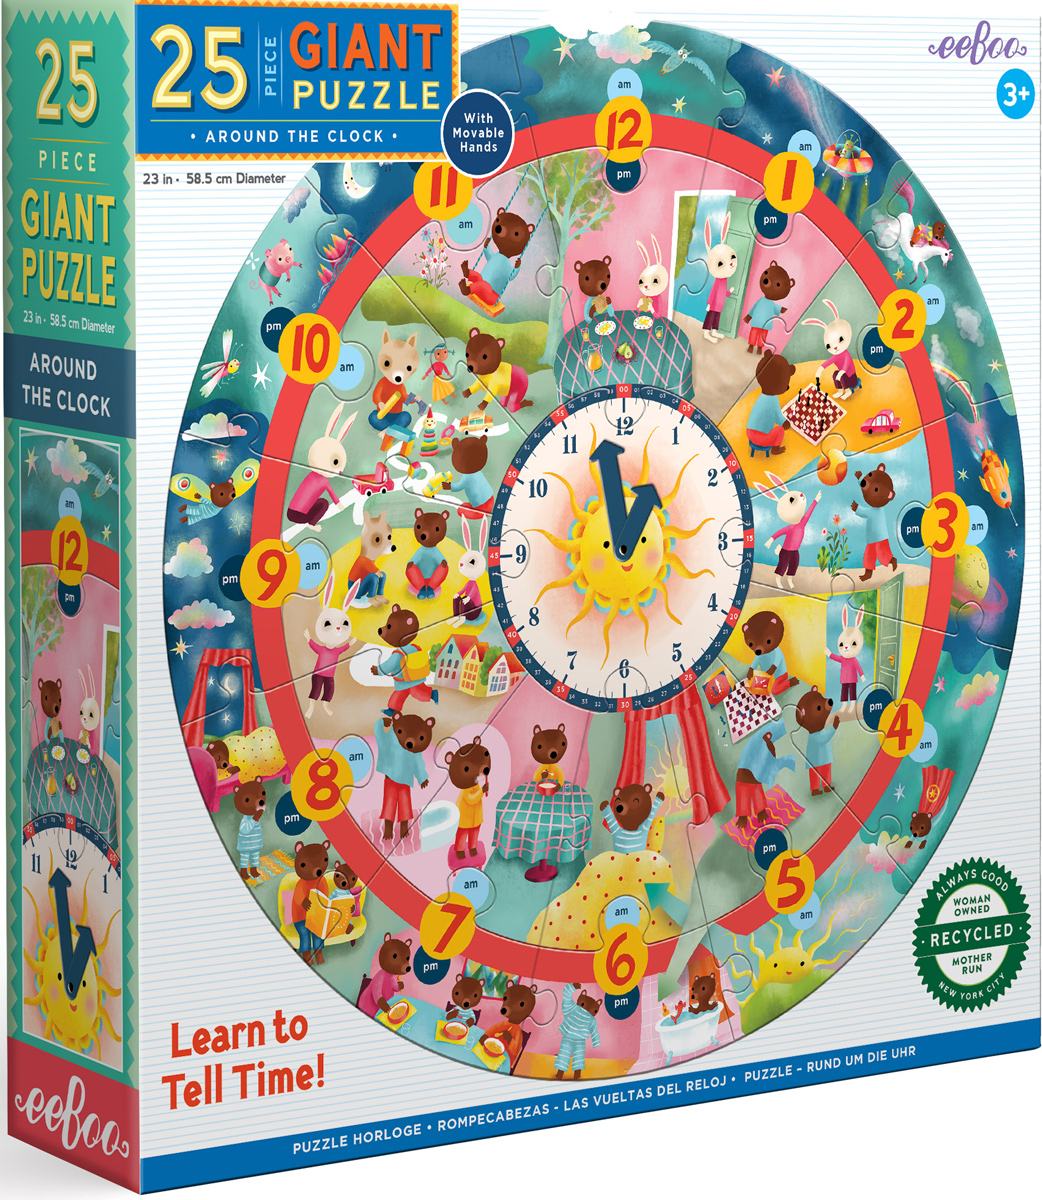 Around the Clock Puzzle Educational Jigsaw Puzzle